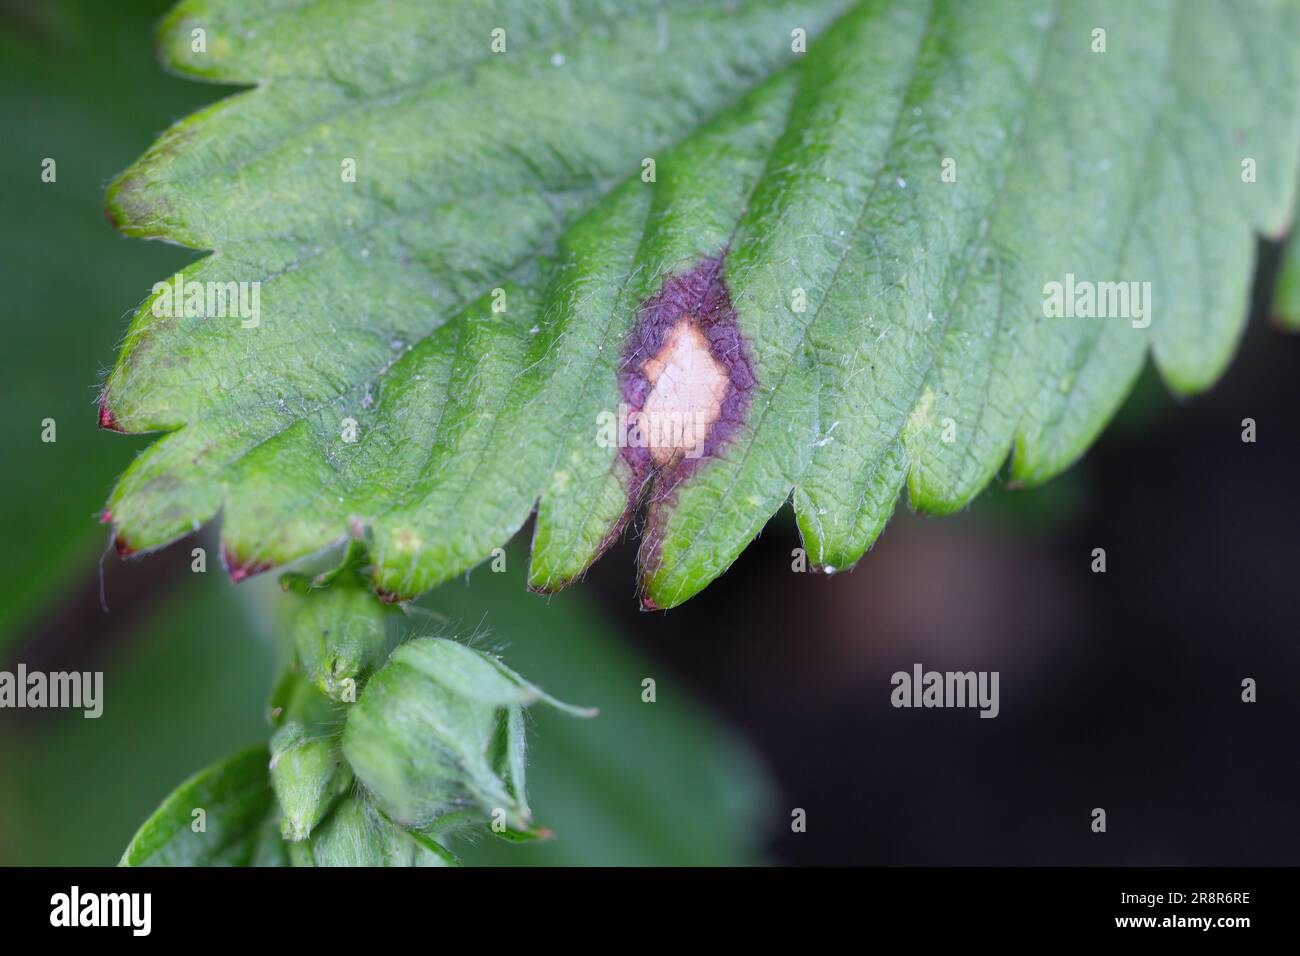 Fungal disease of strawberry. Spots visible on strawberry leaf. Stock Photo